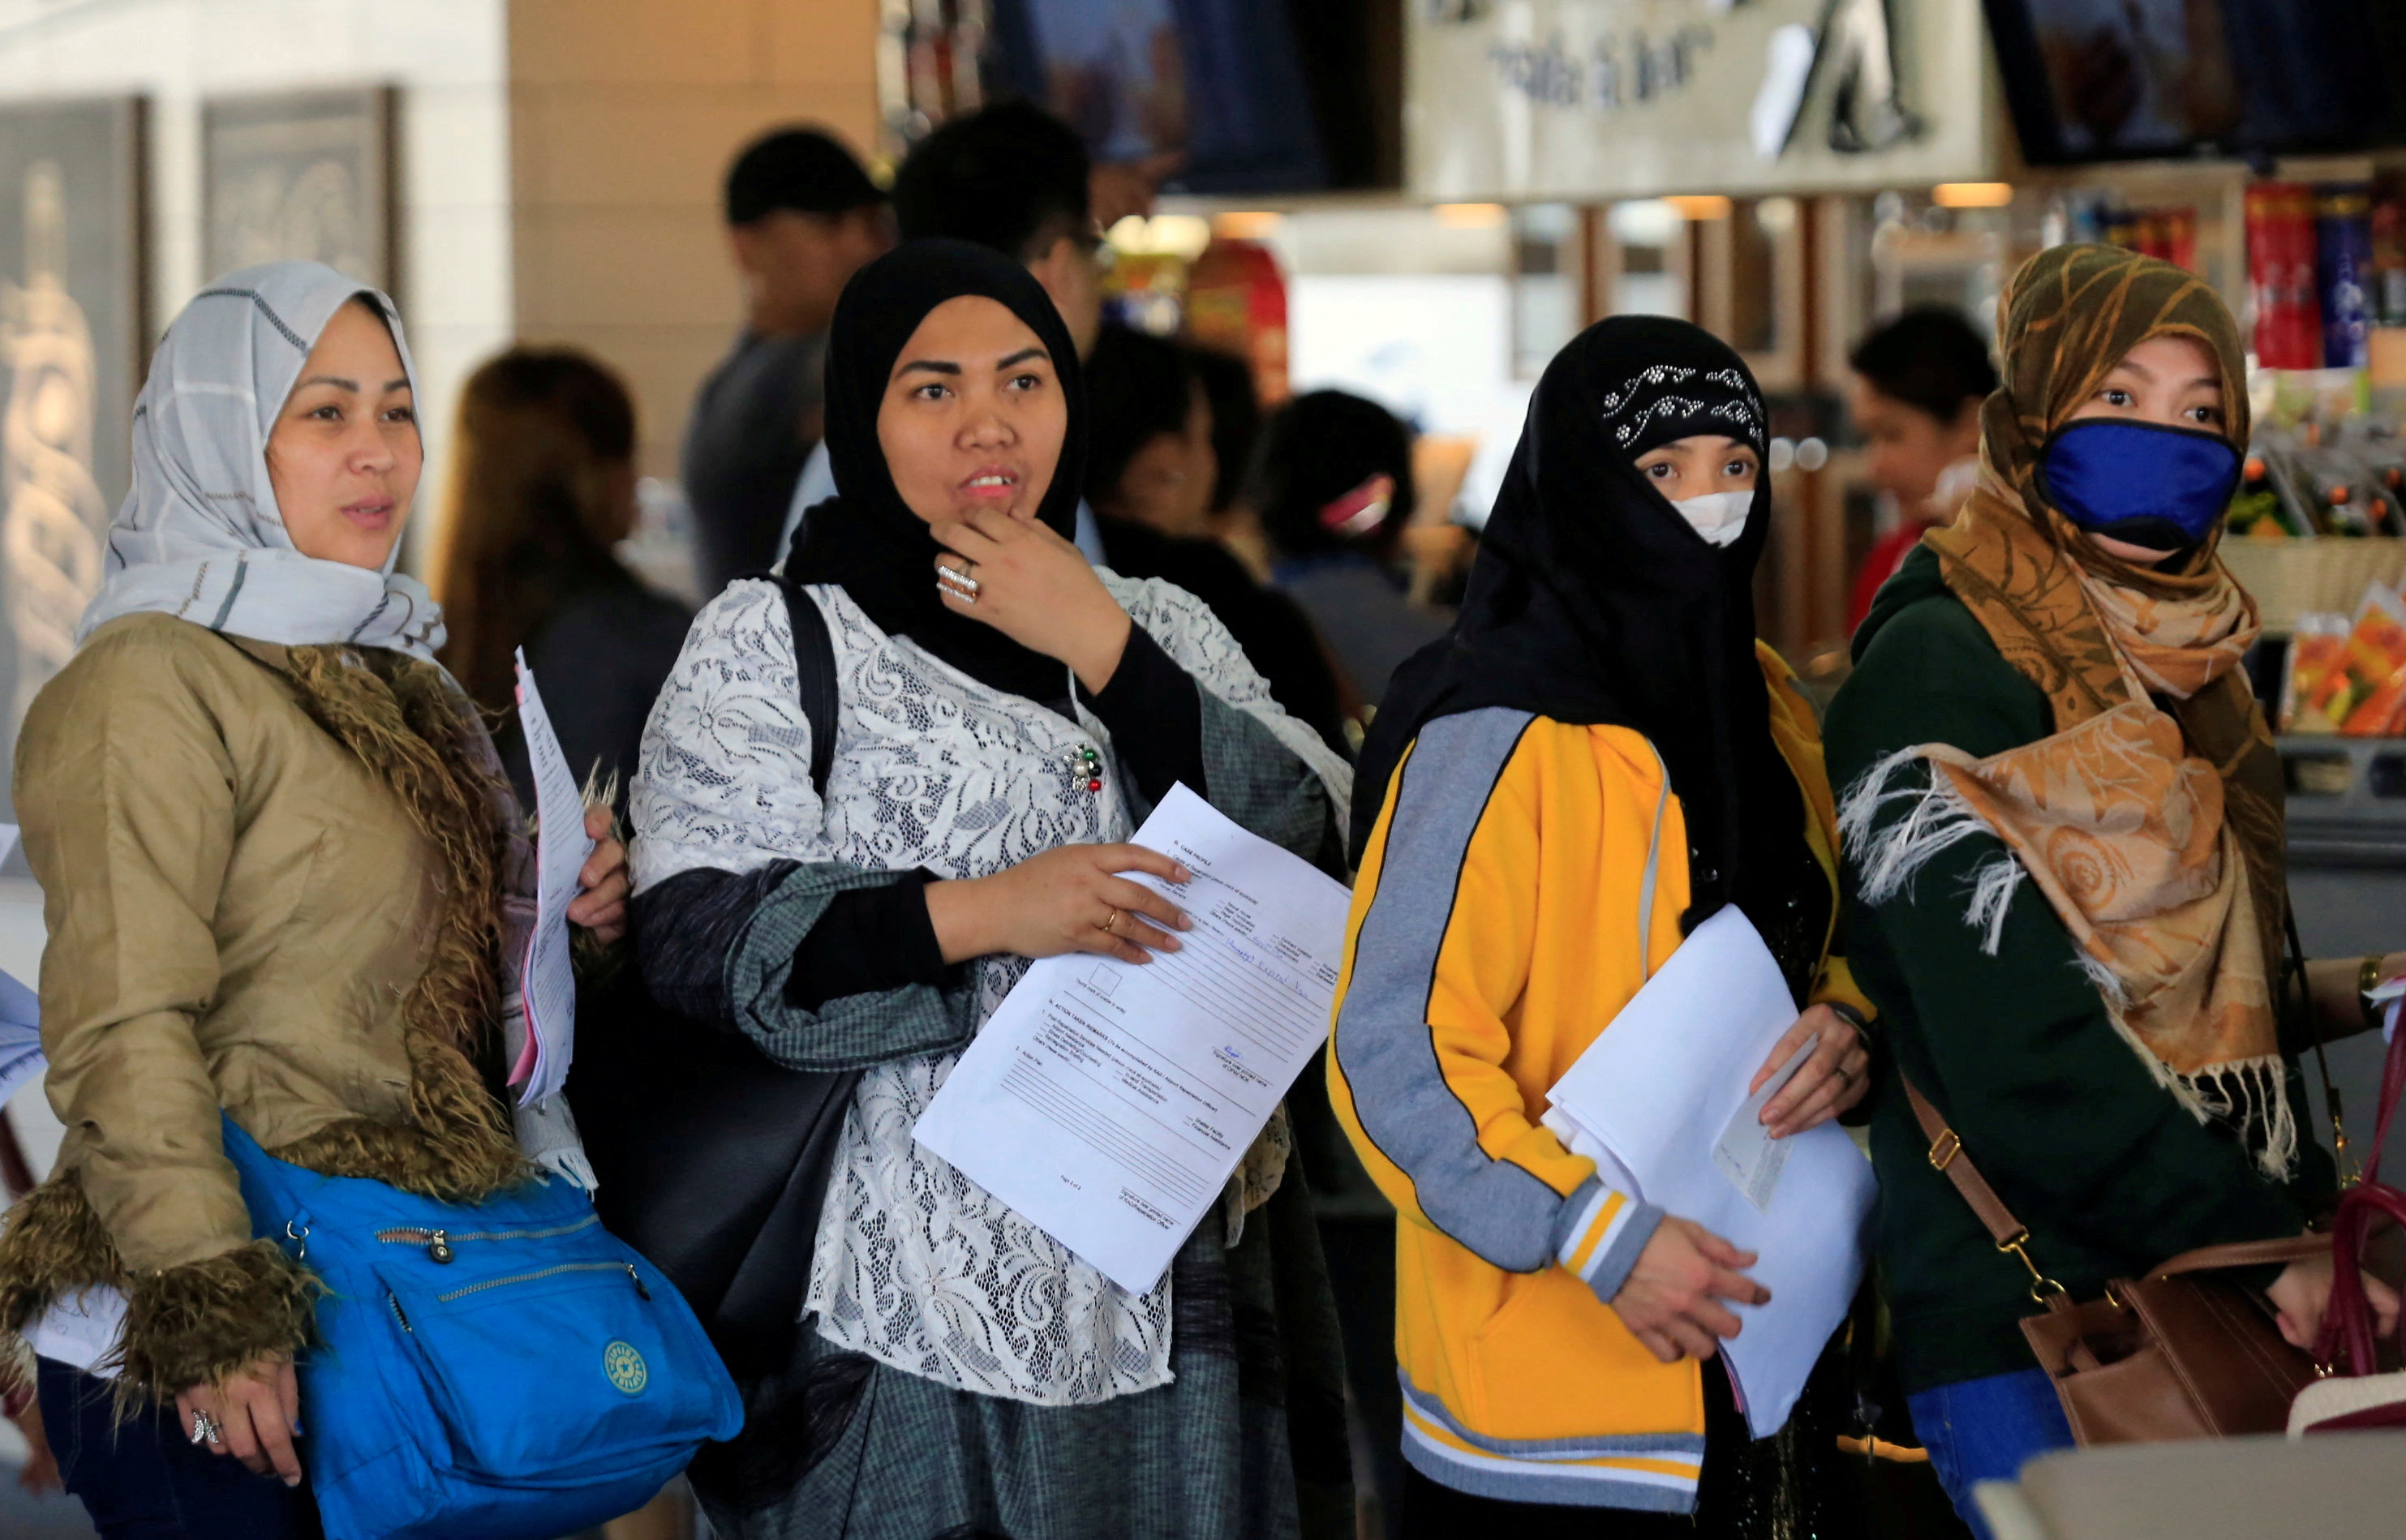 Overseas Filipino Workers (OFW) from Kuwait hold their documents as they queue upon their arrival at the Ninoy Aquino International Airport in Pasay city, Metro Manila